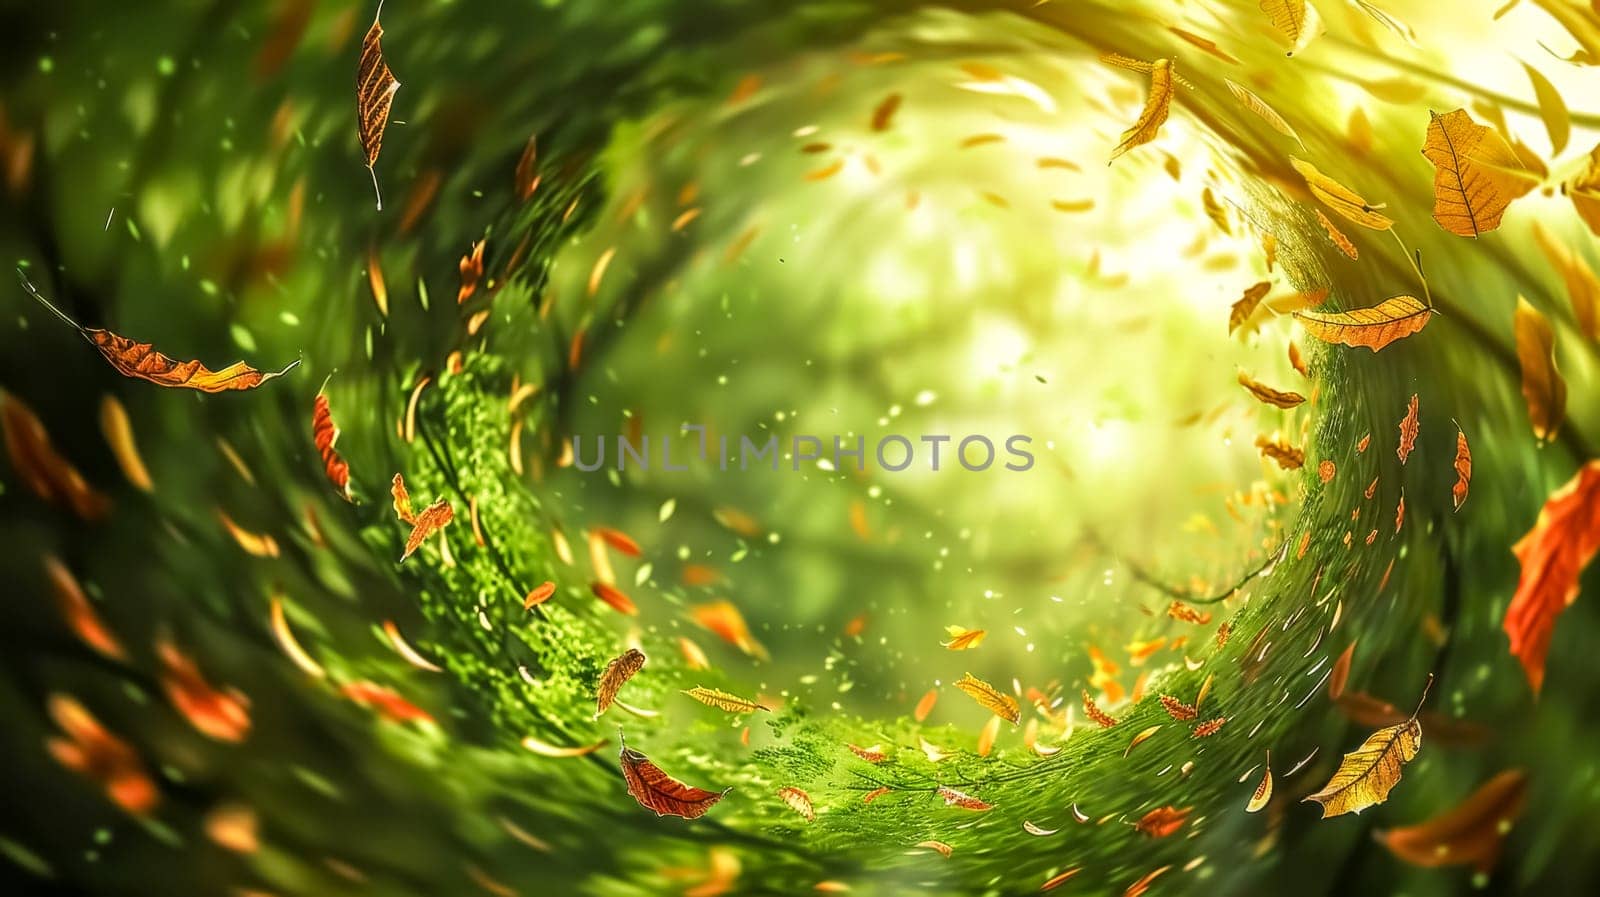 Vivid composition capturing falling leaves in a dynamic vortex of autumn colors